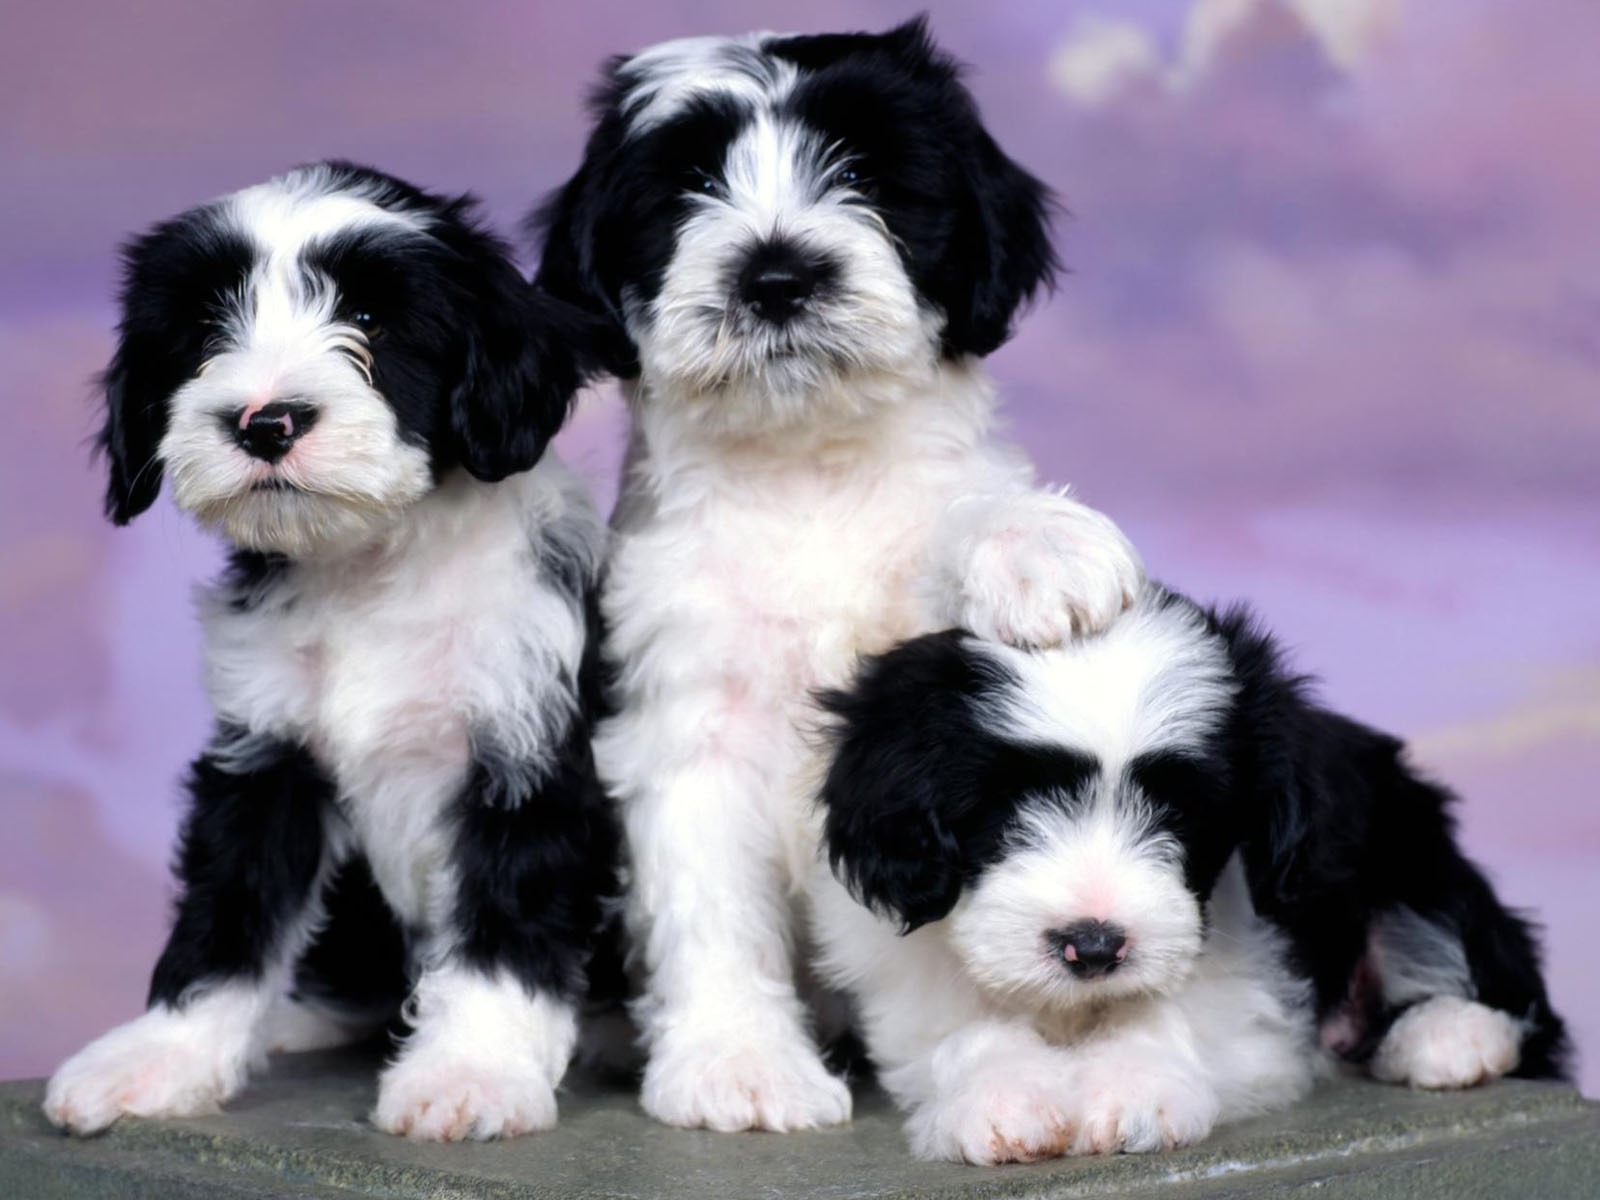 Puppy Photo HD wallpapers (1) #19 - 1600x1200